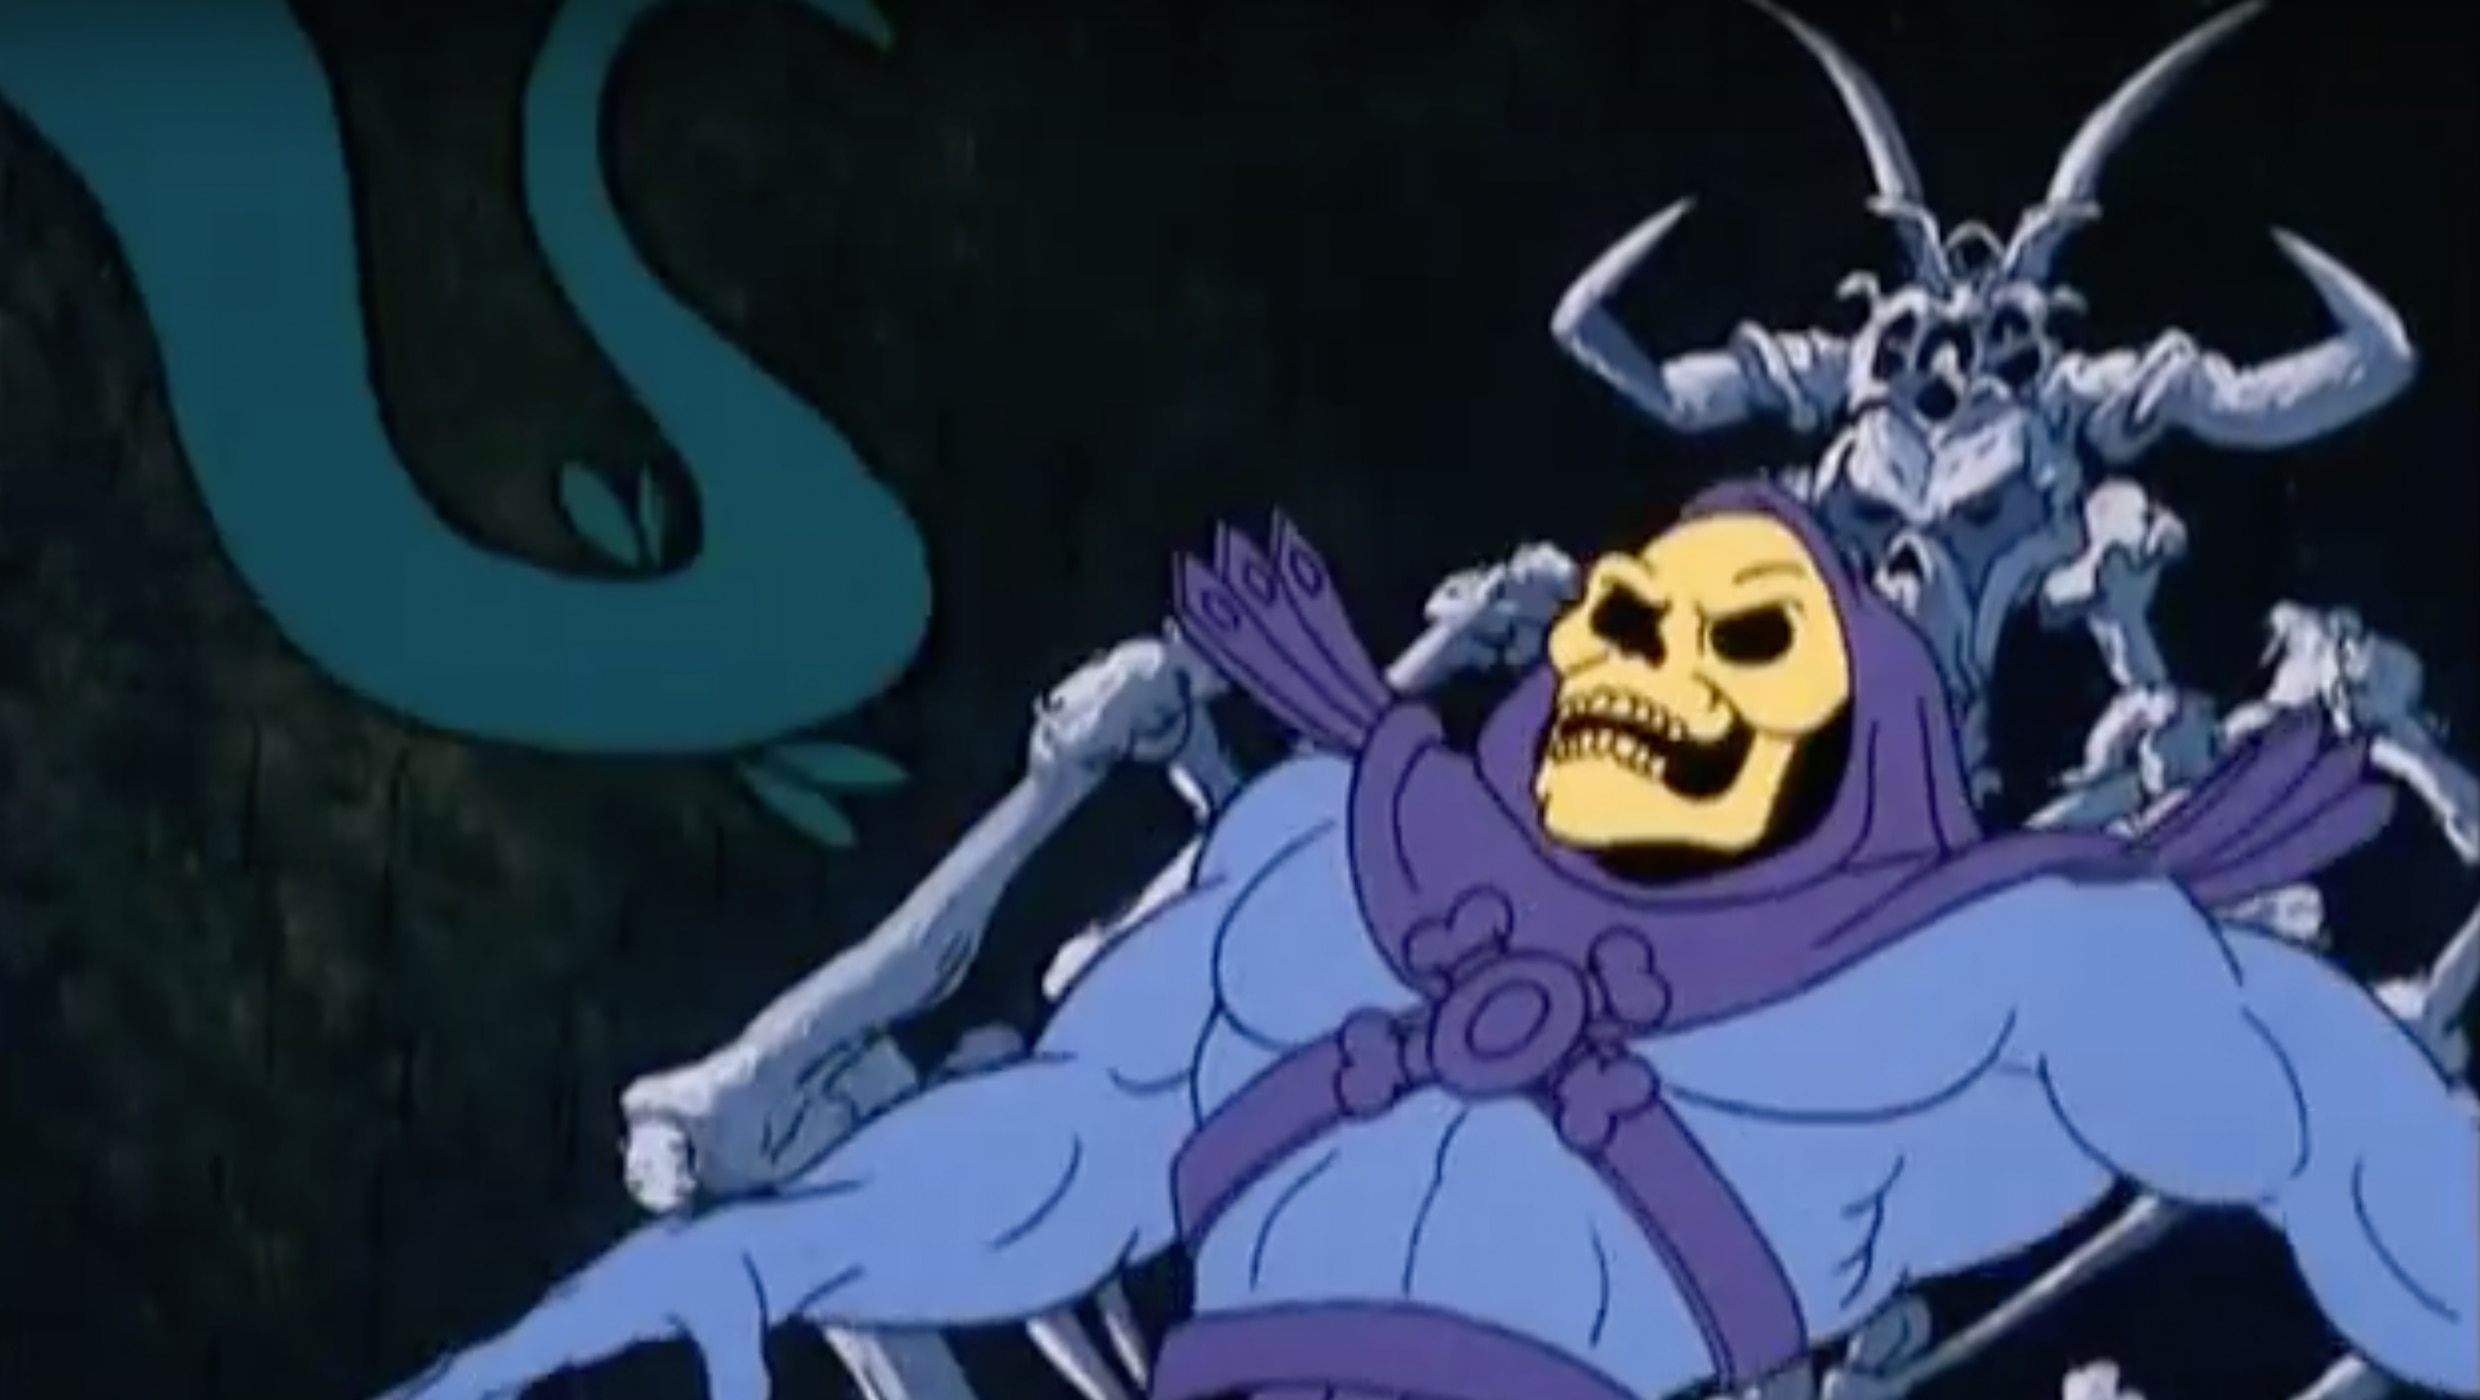 On He Man S 35th Anniversary Let S Review Skeletor S 11 Most